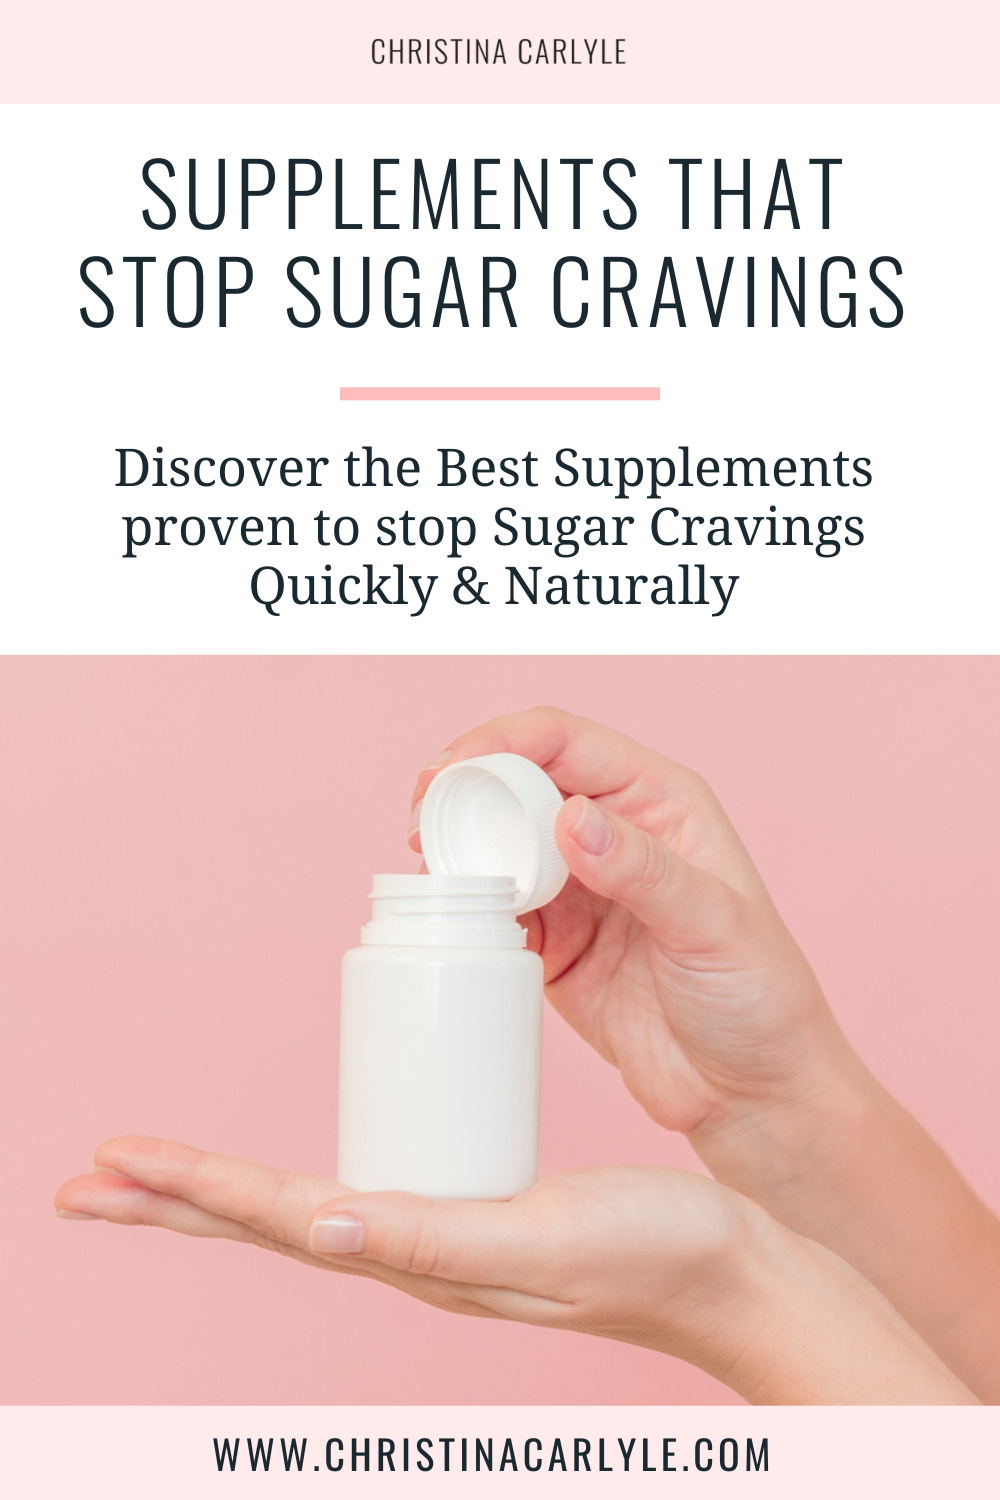 text that says Supplements that Stop Sugar Cravings and a hand holding a bottle of supplements on a pink background